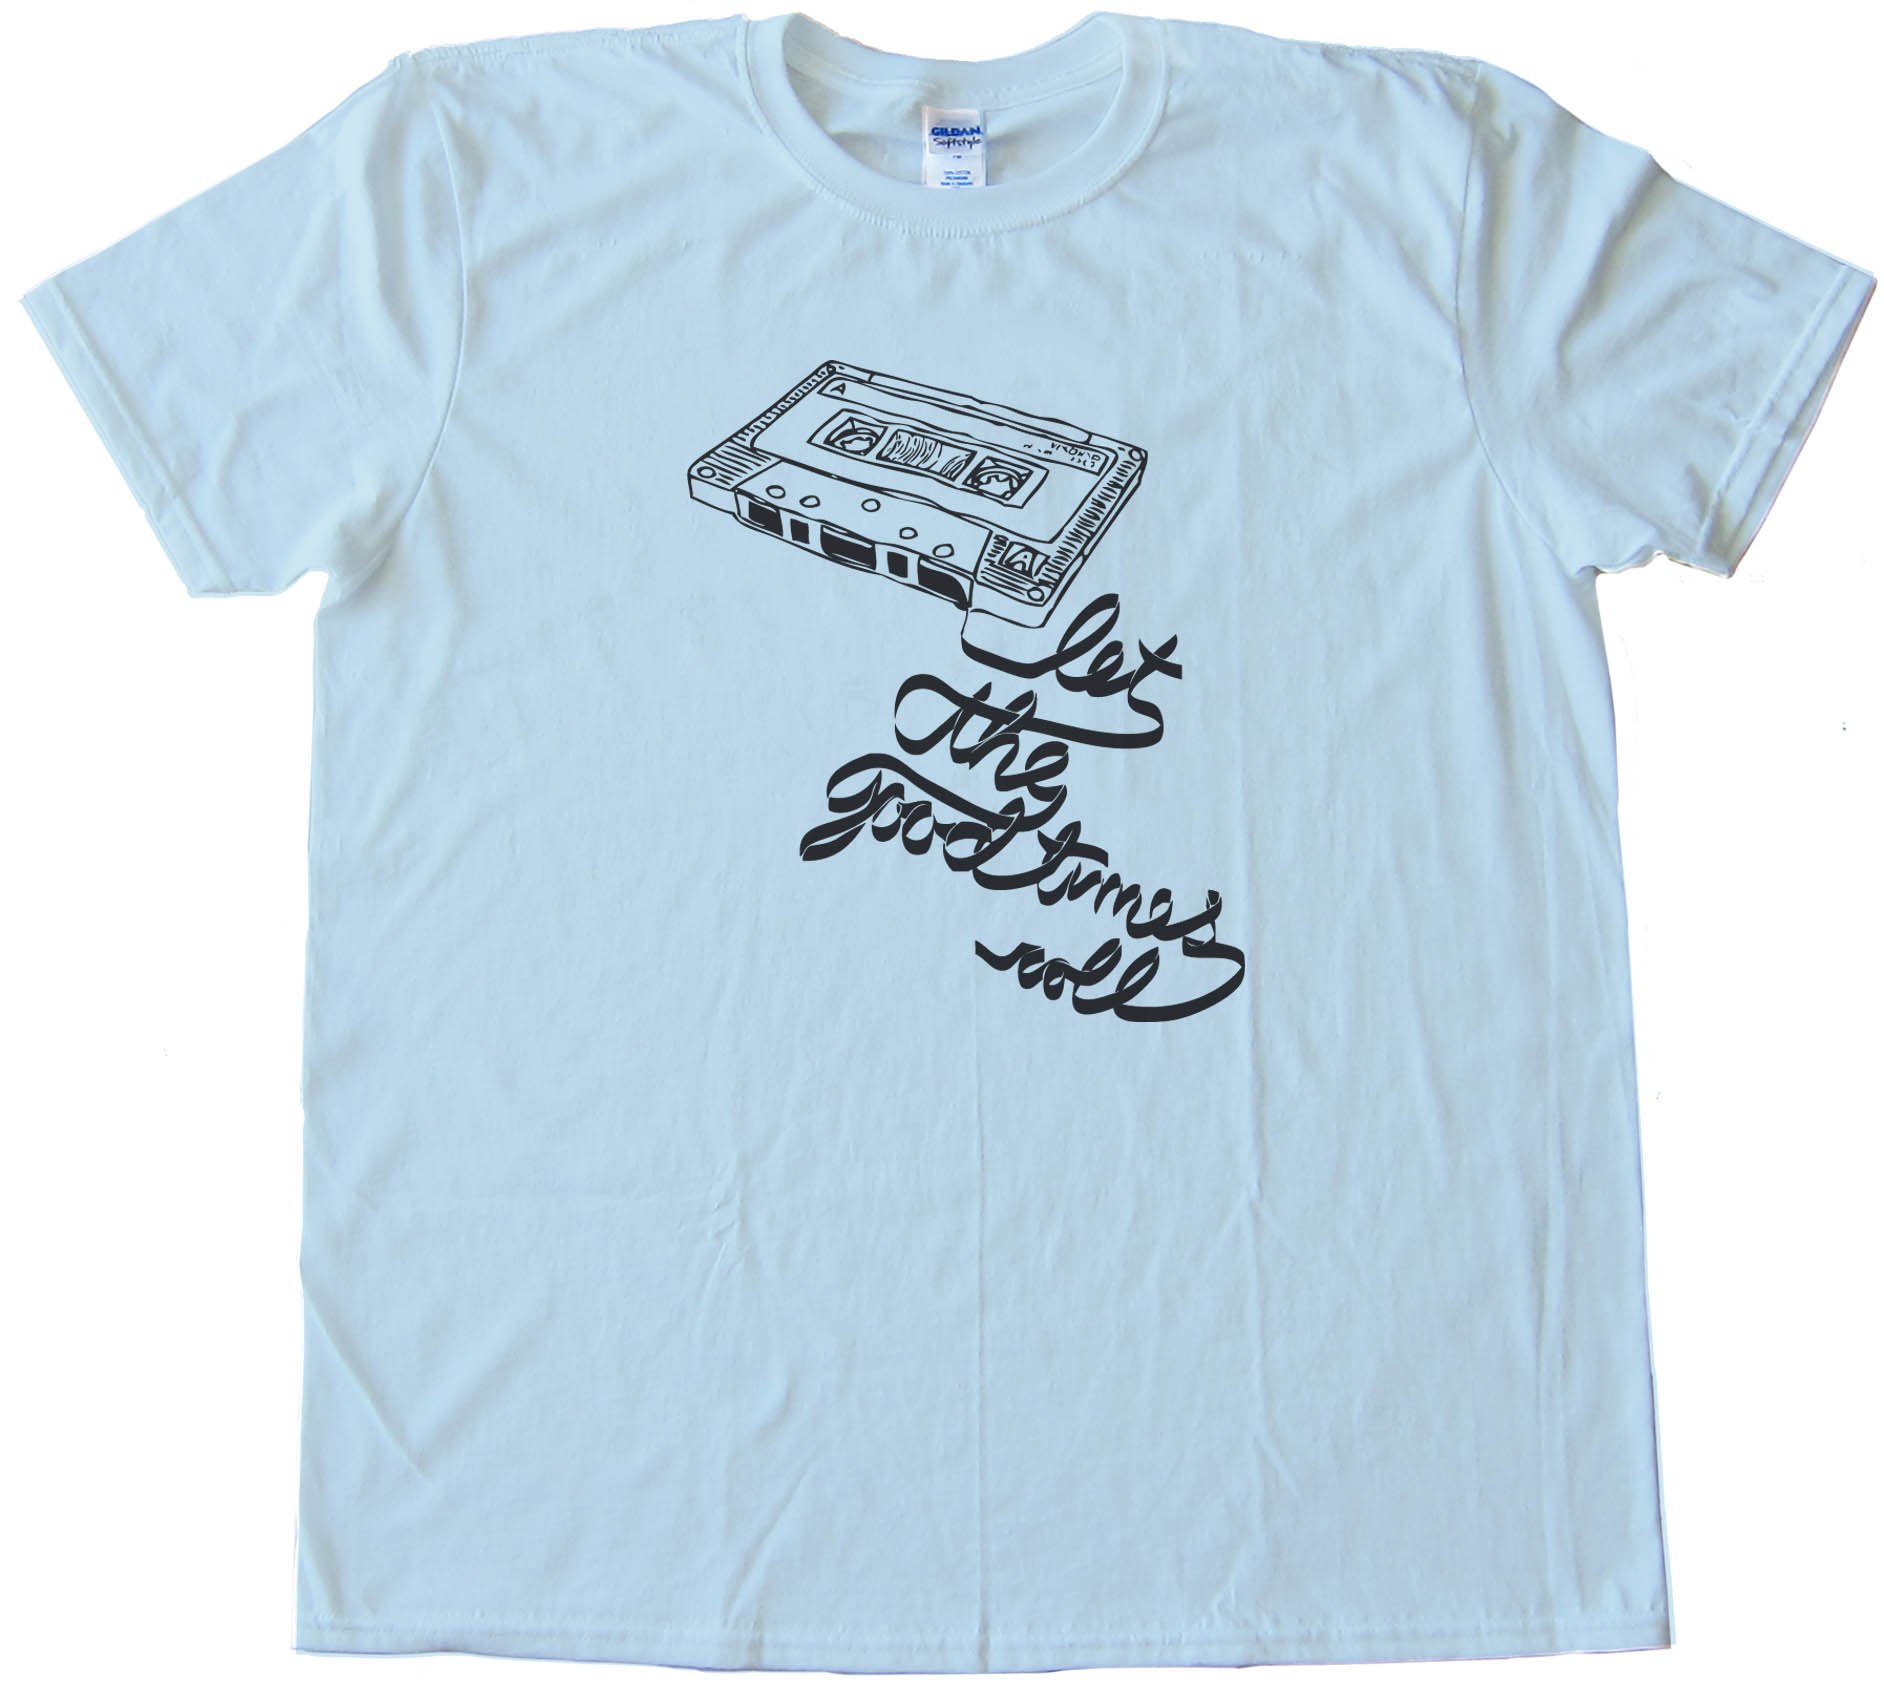 Let The Good Times Roll - Retro Cassette Tee Shirt